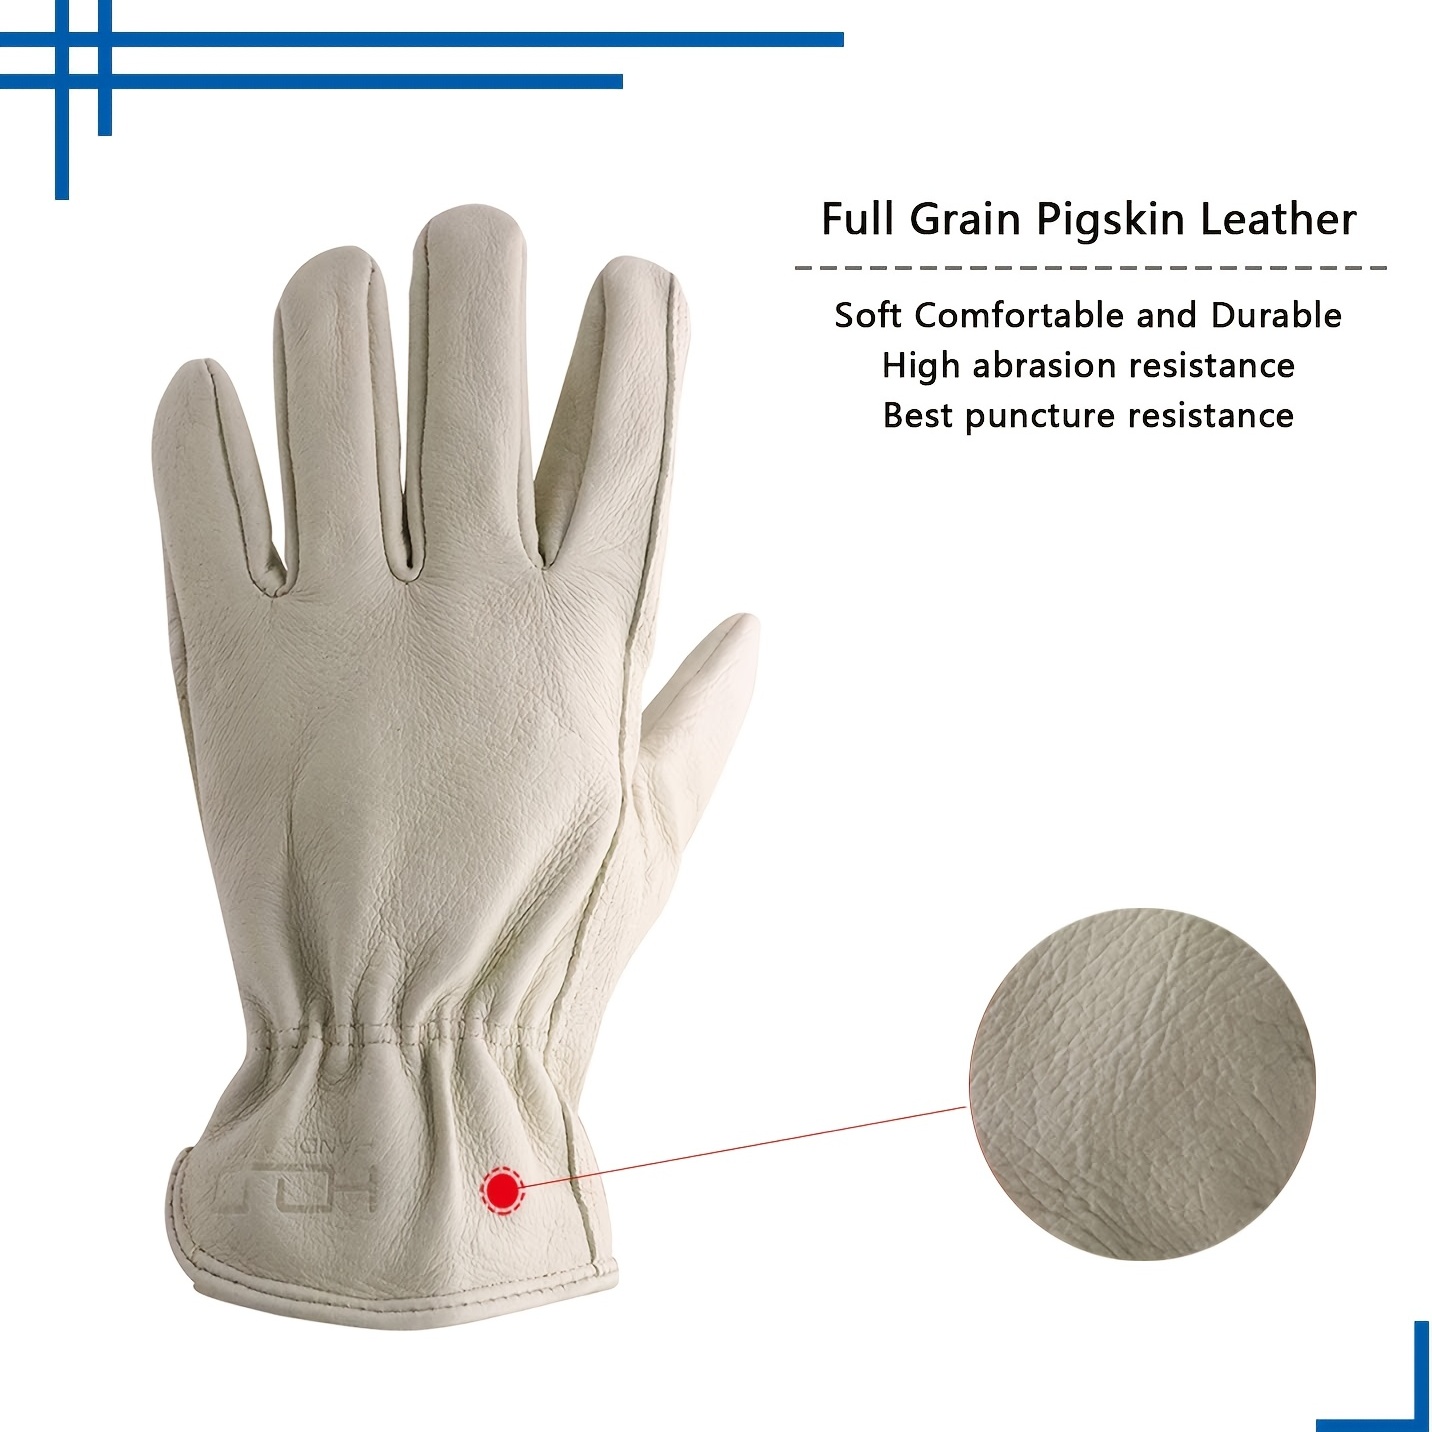 Size XL Leather Abrasion Protection Work Gloves